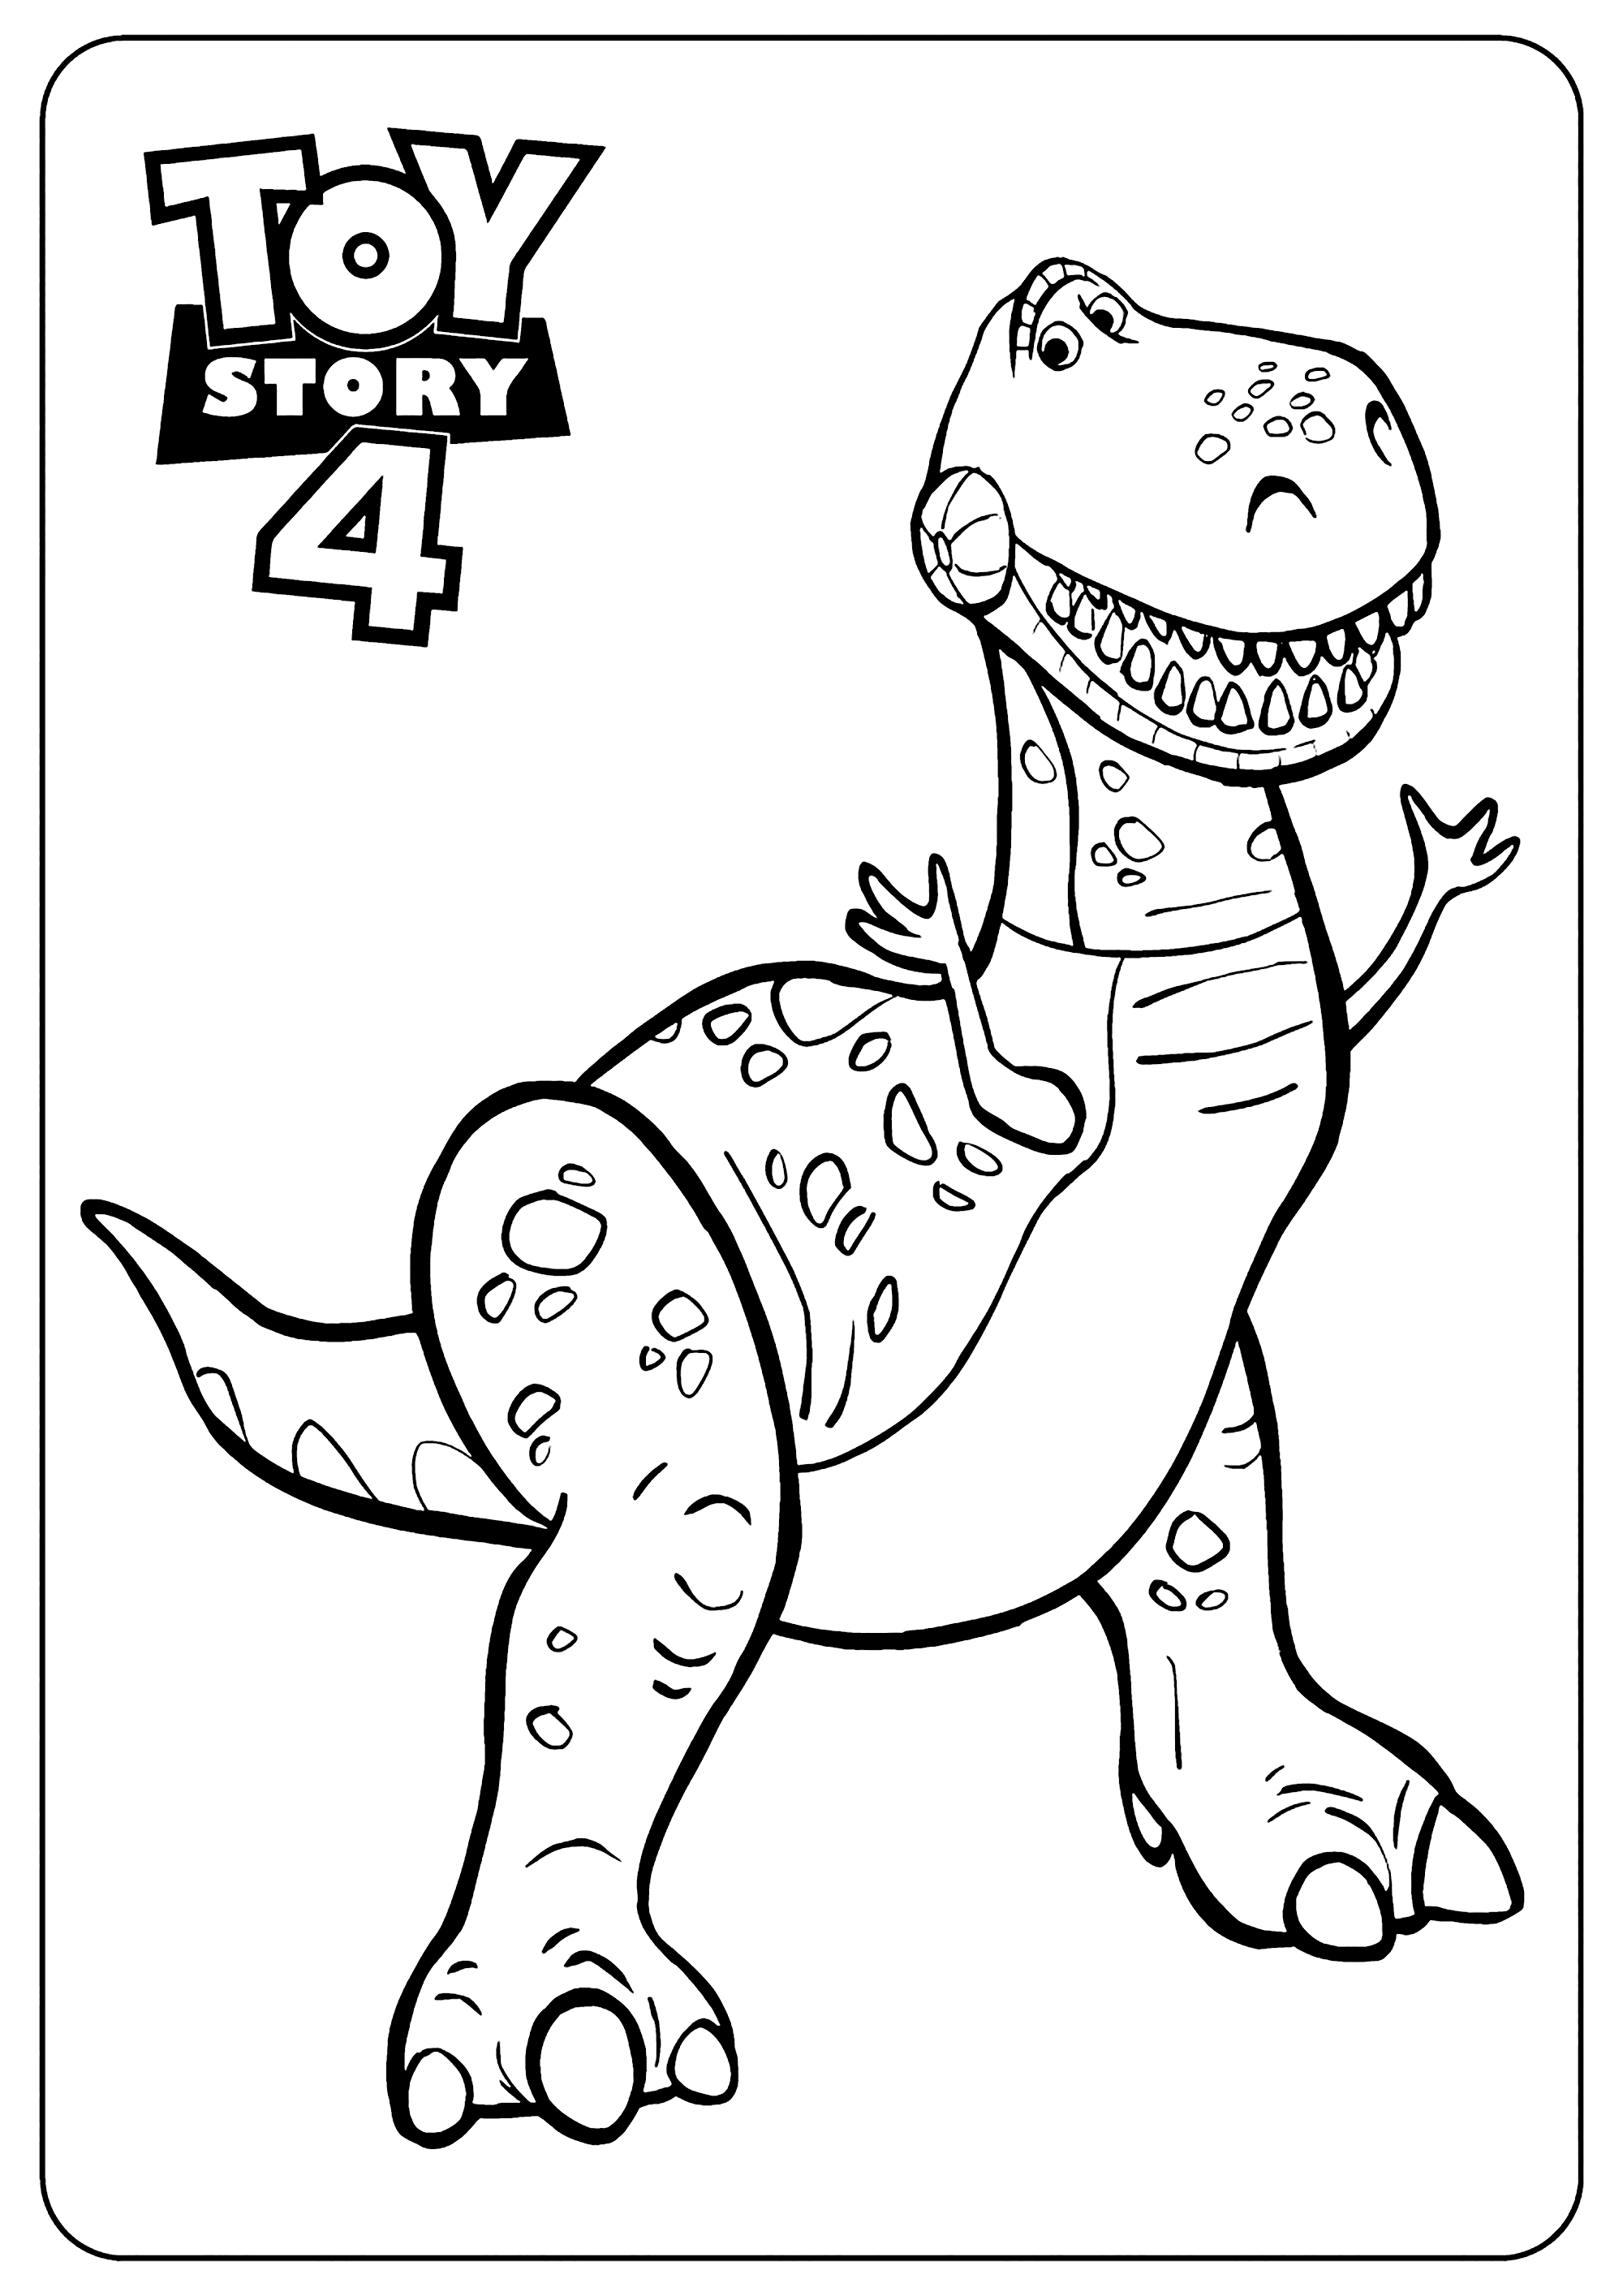 Rex Cool Toy Story 4 Coloring Pages Toy Story 4 Kids Coloring Pages